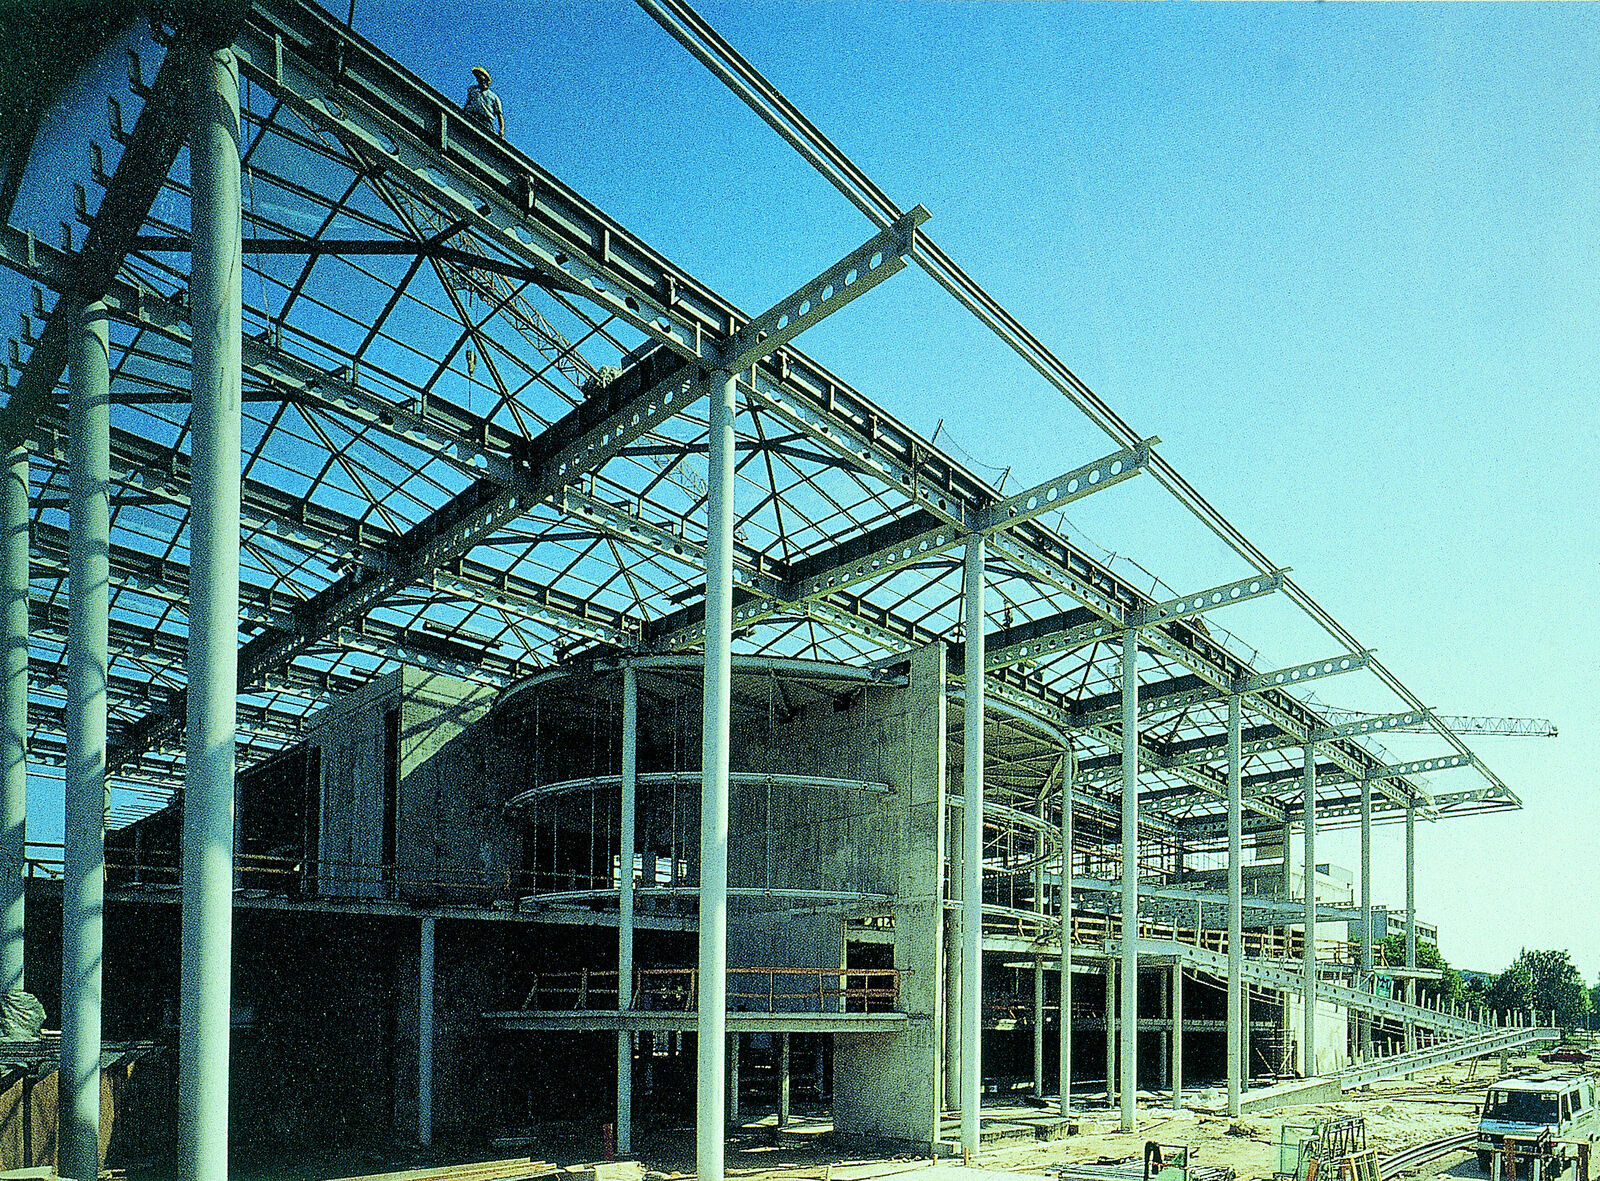 A construction site with a large steel framework depicting the construction of a modern building.